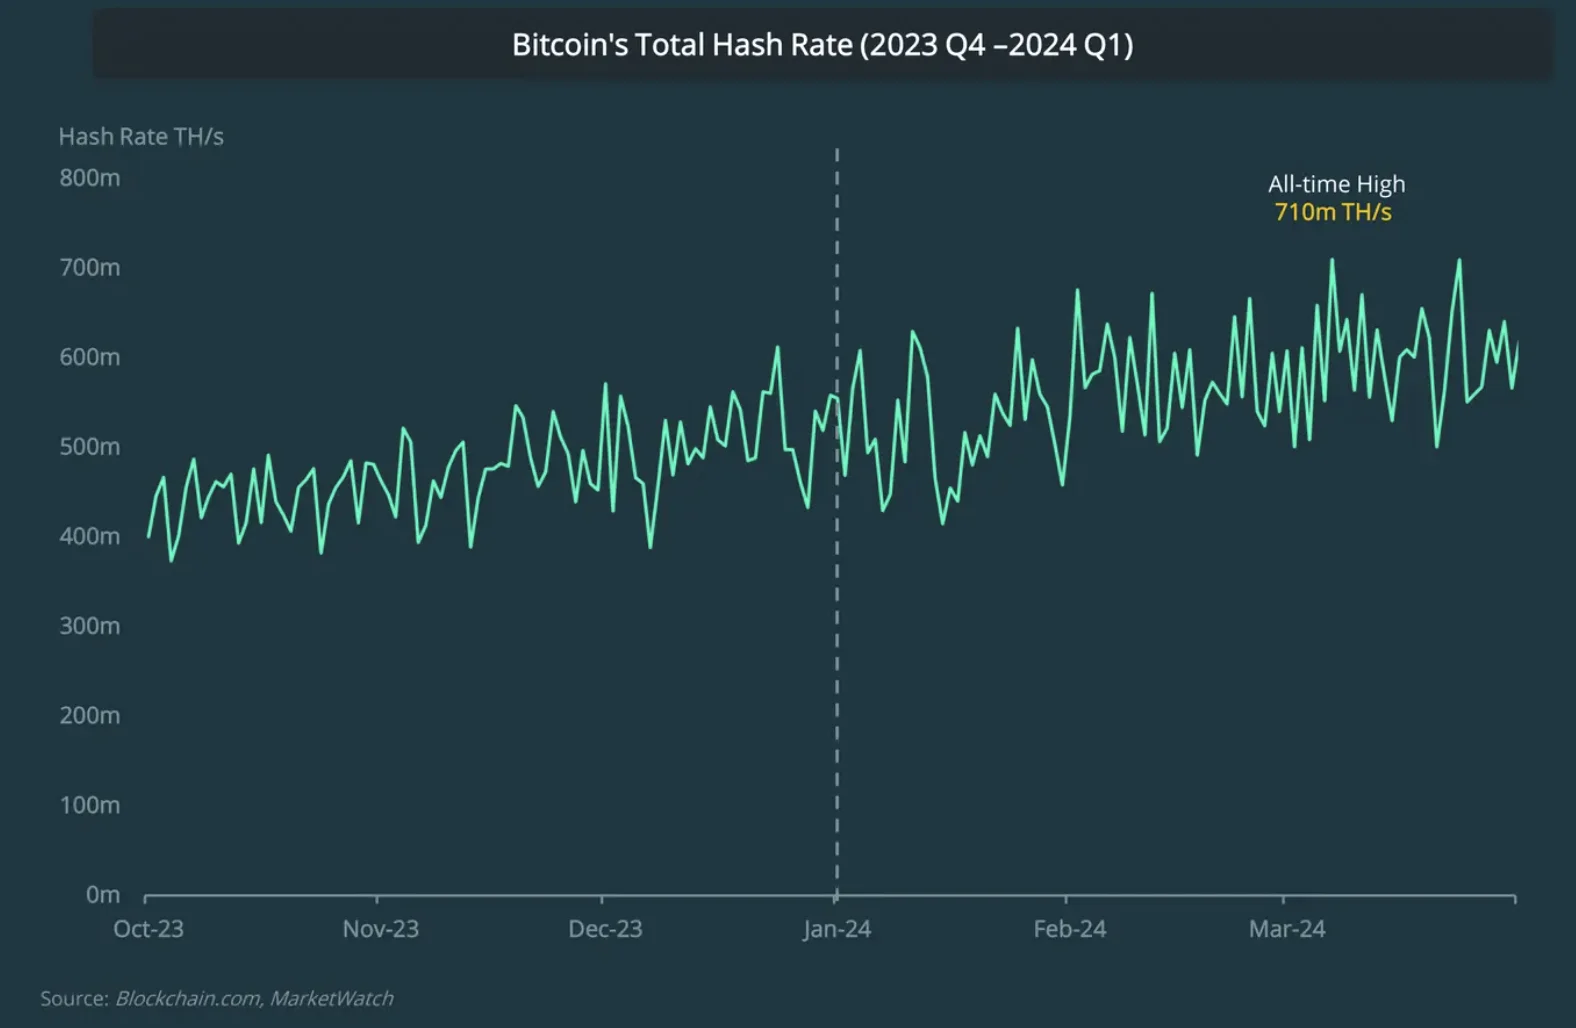 The Bitcoin Hash Rate in Q1 2024